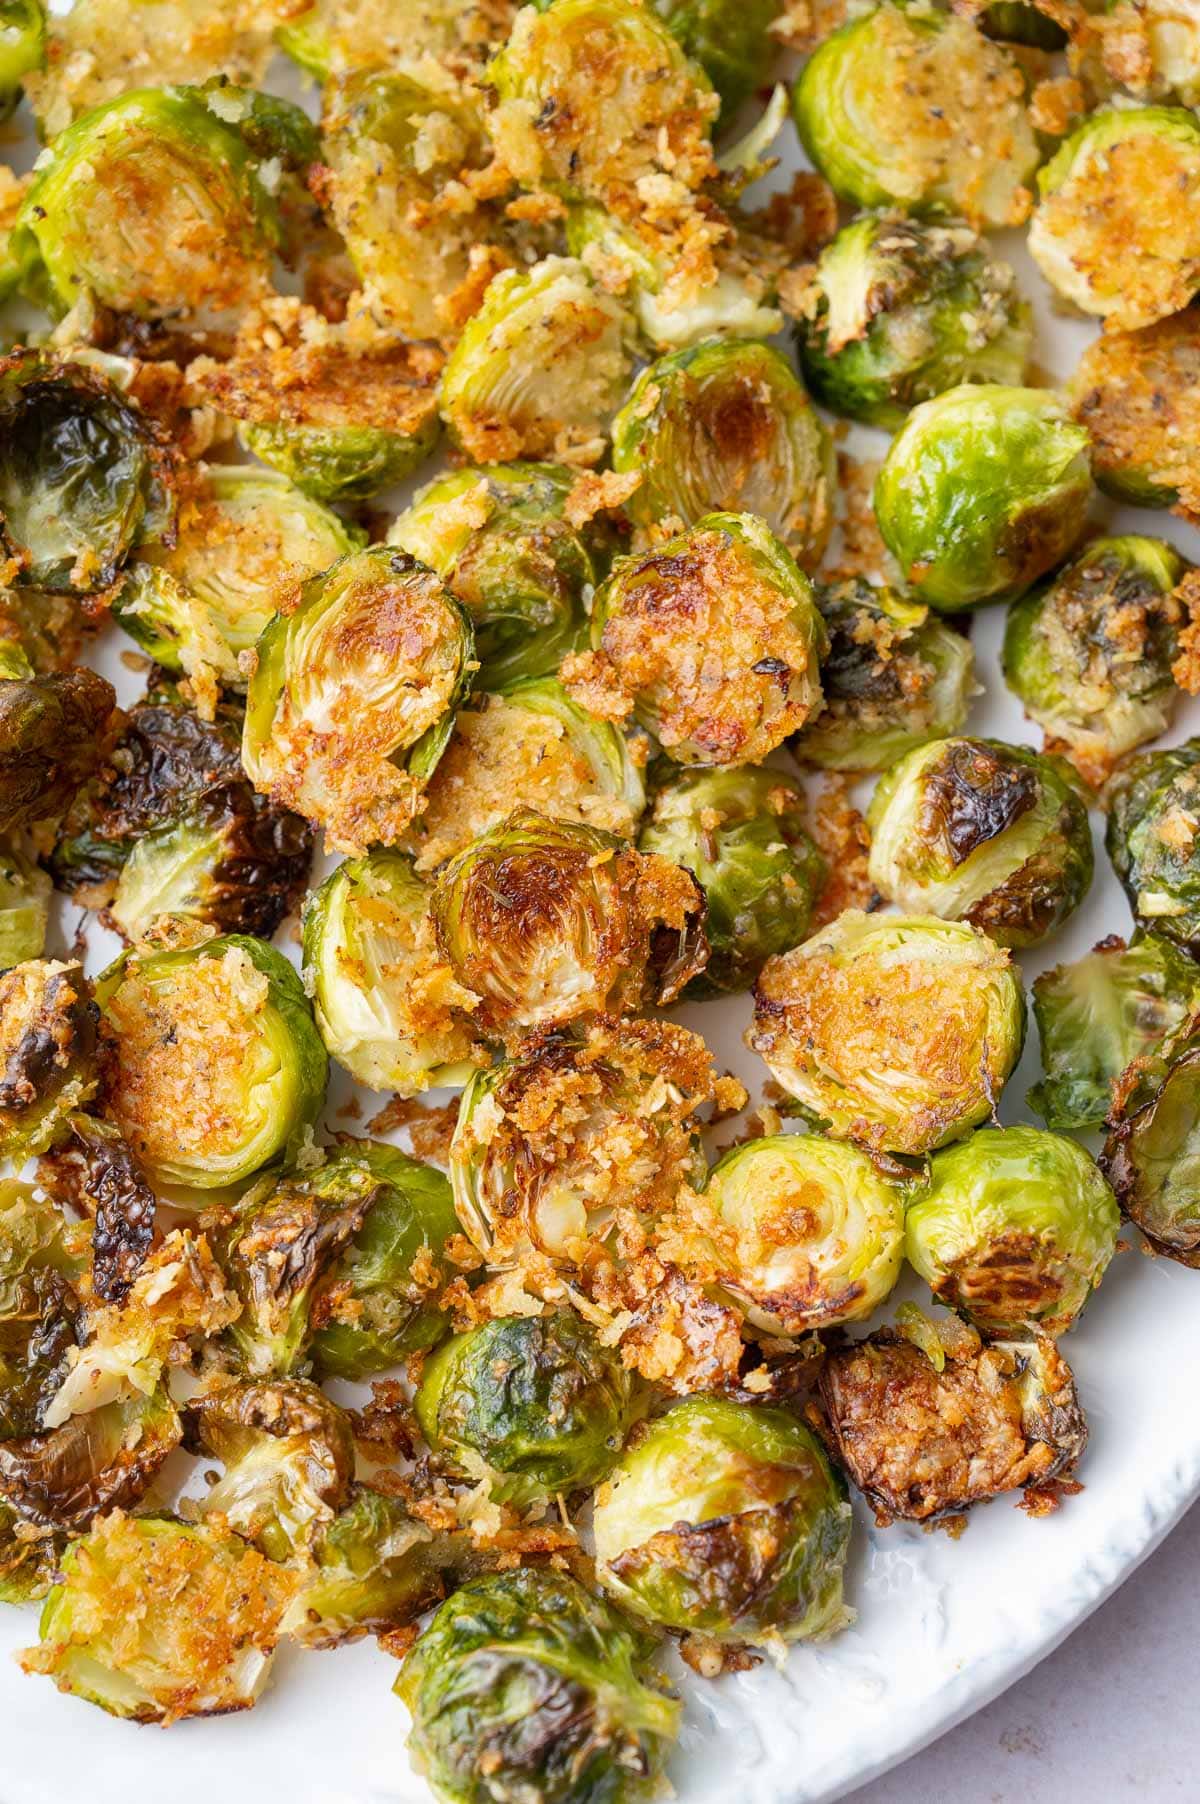 Roasted brussel sprouts on a white plate.